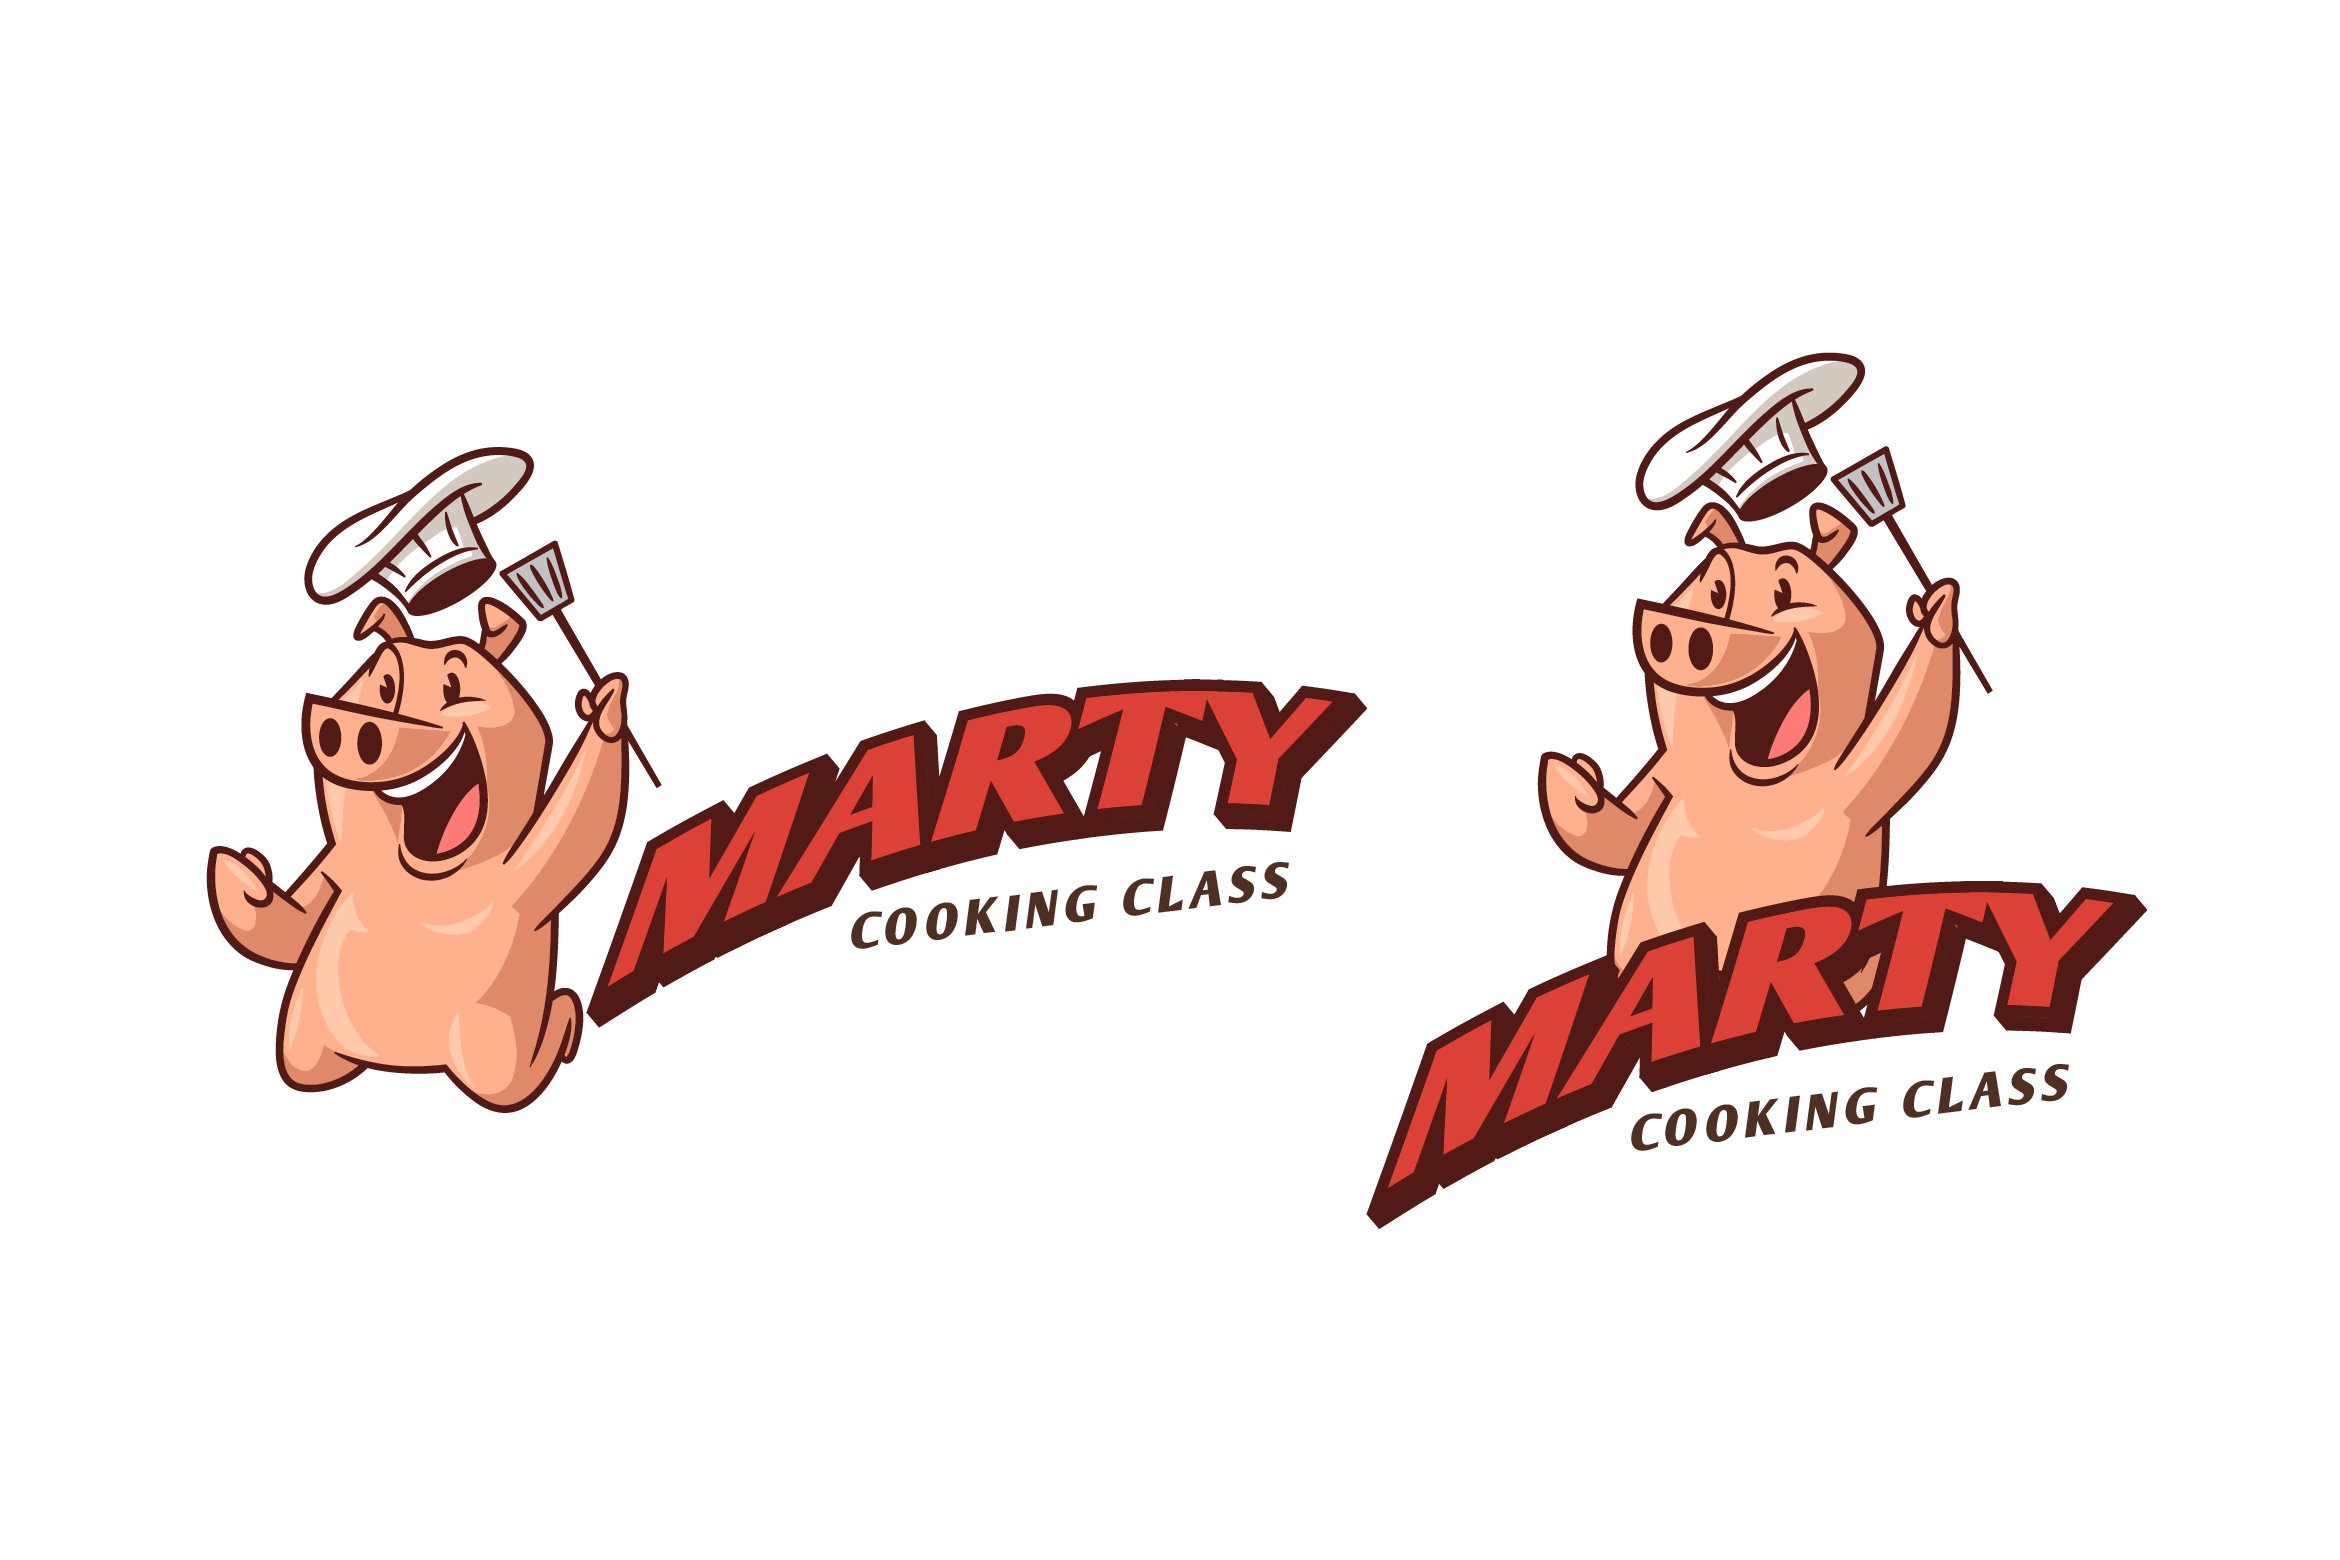 Marty Chef Pig cover image.